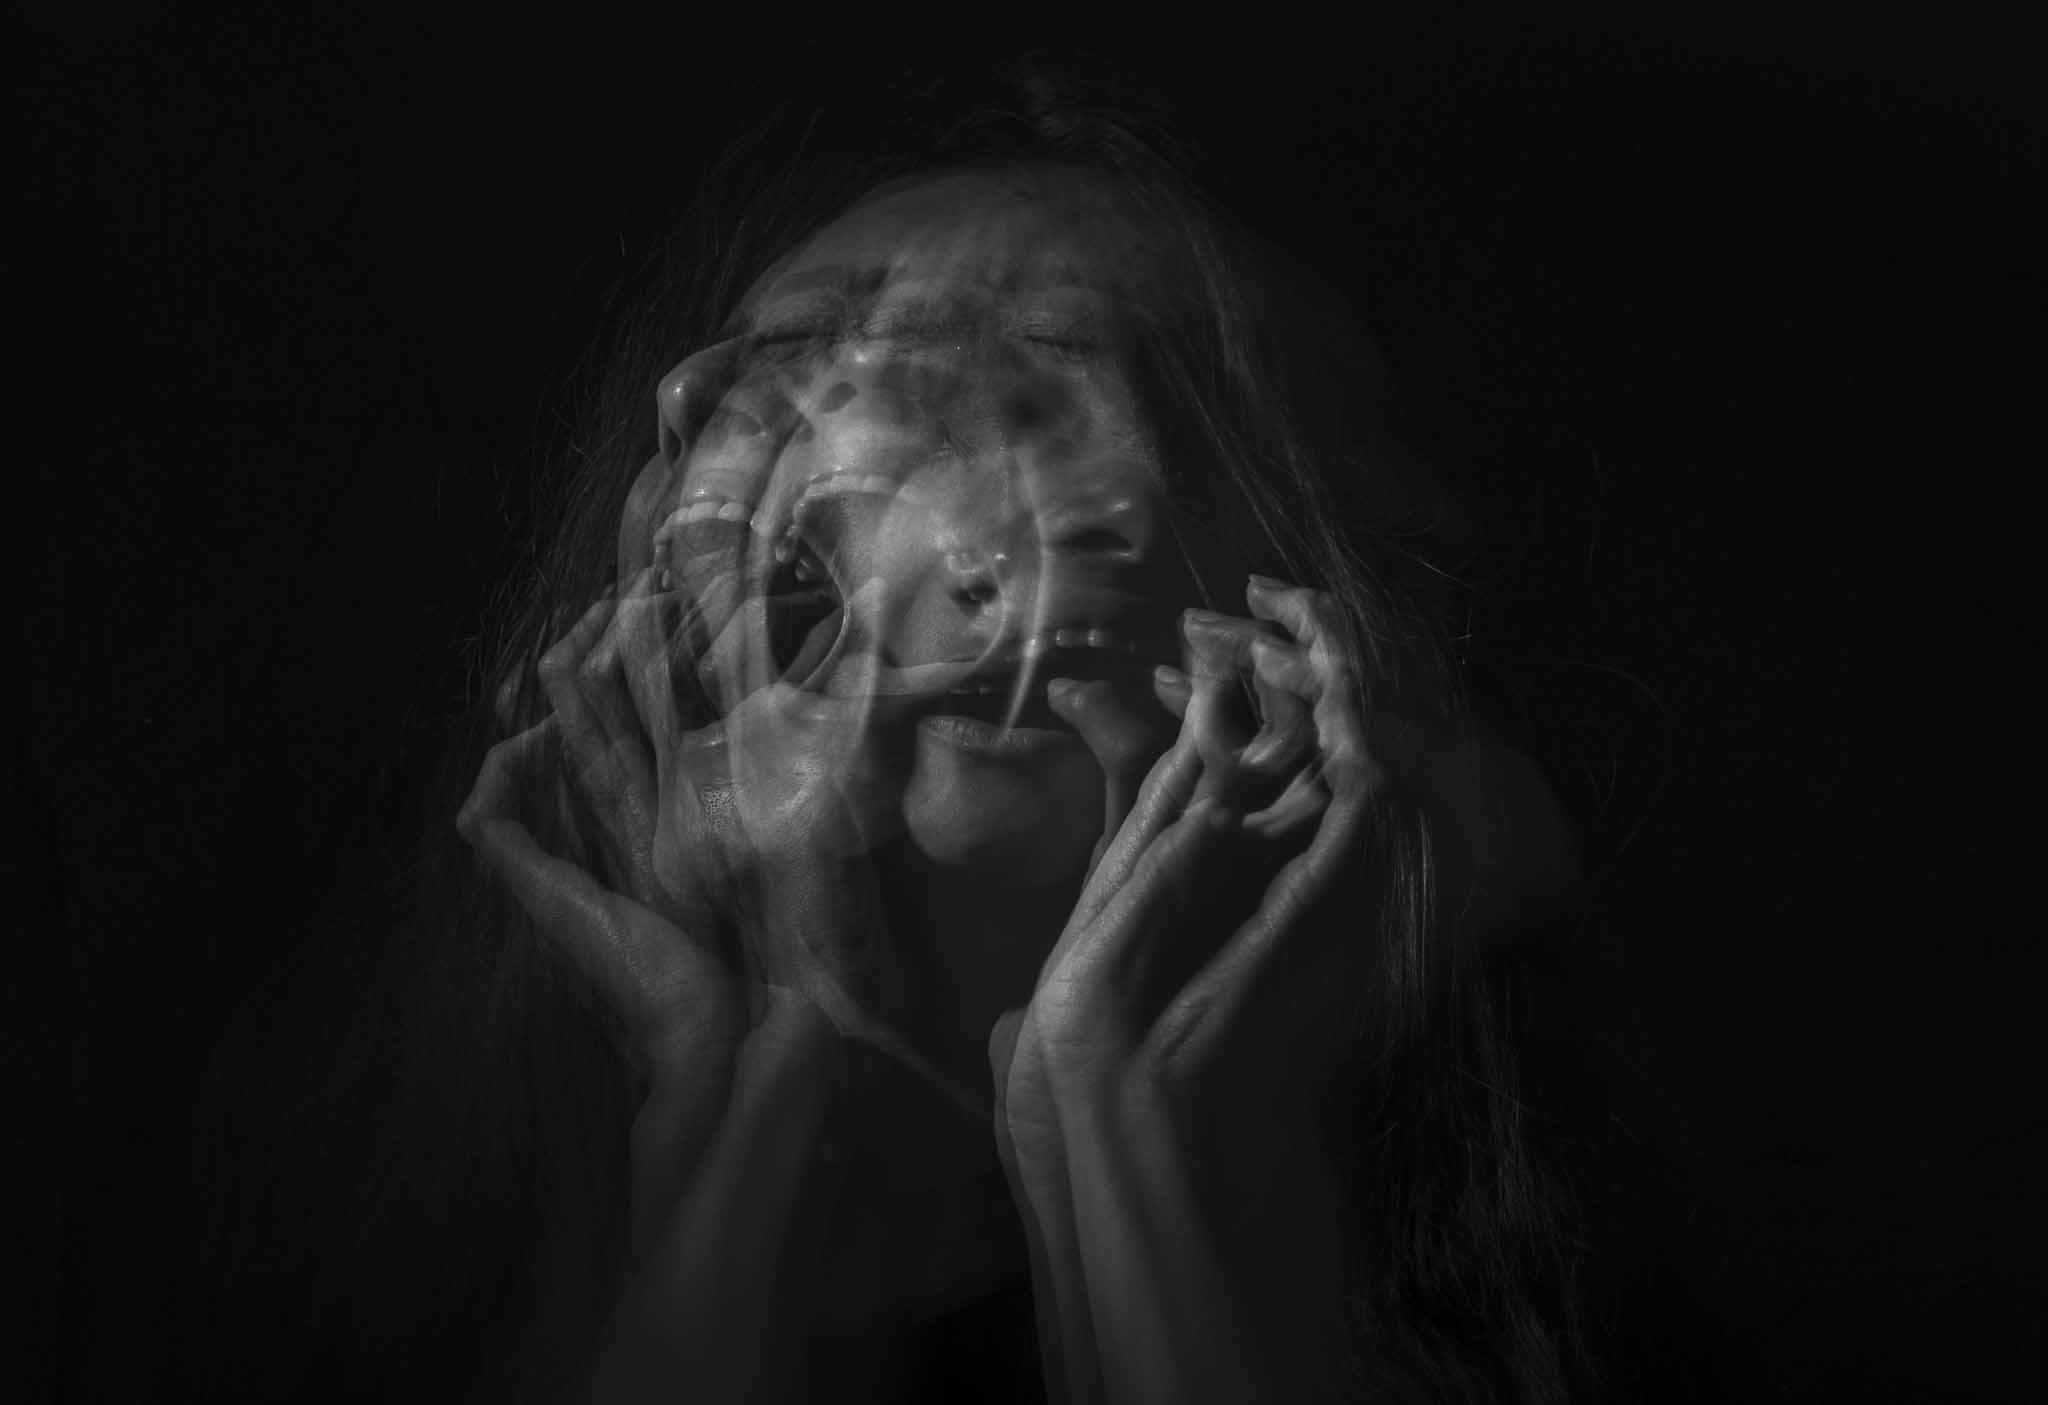 Abstract women in black and white screaming in obvious distress